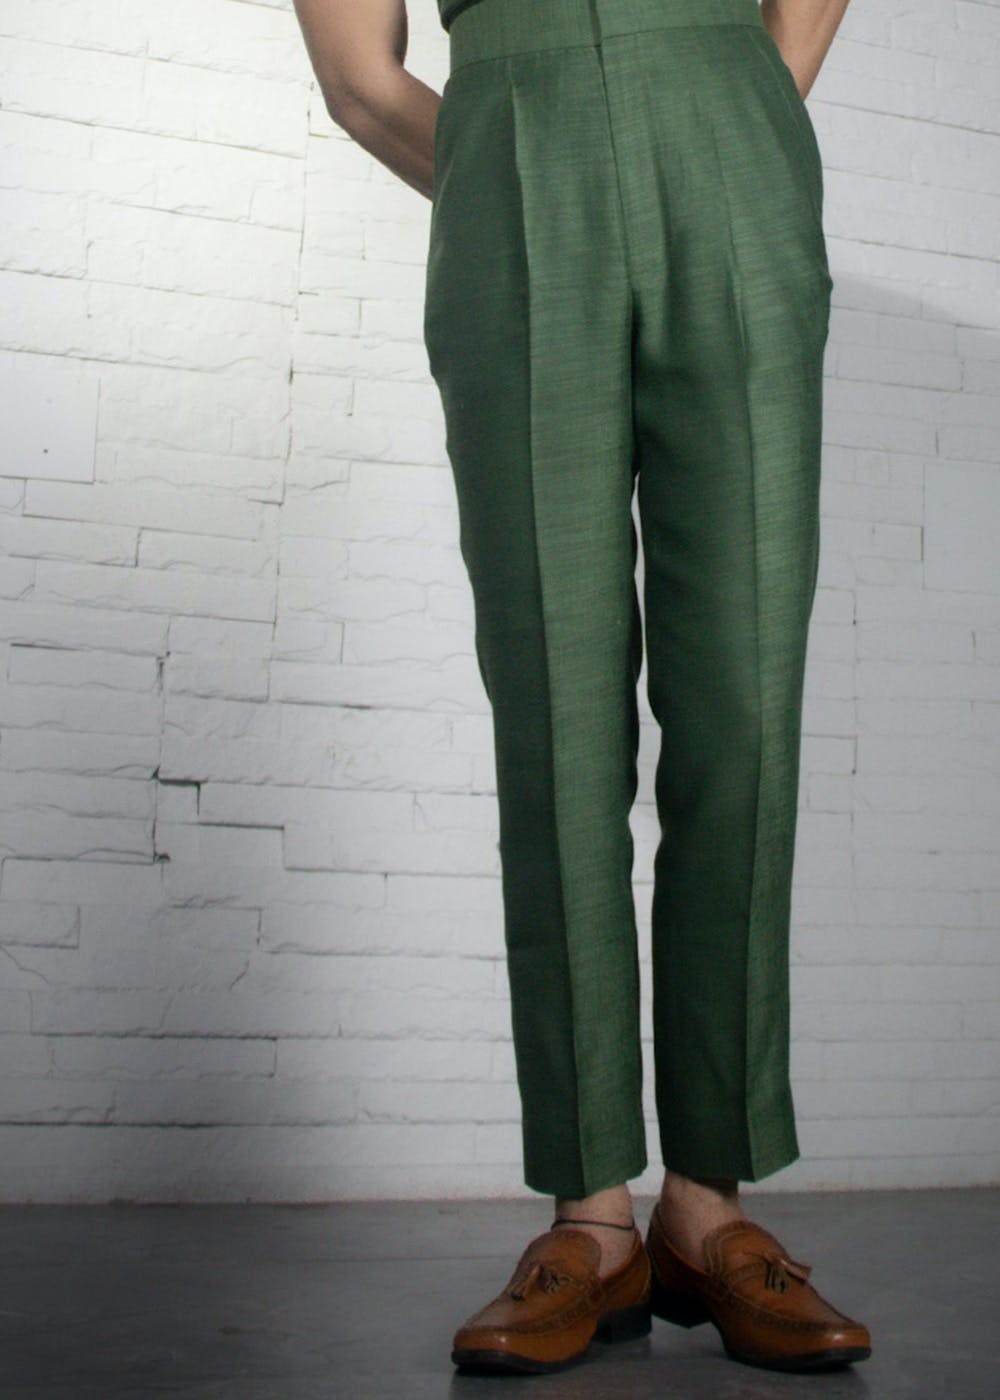 Buy ALLEN SOLLY Dark Green Solid Cotton Regular Fit Womens Casual Trousers   Shoppers Stop